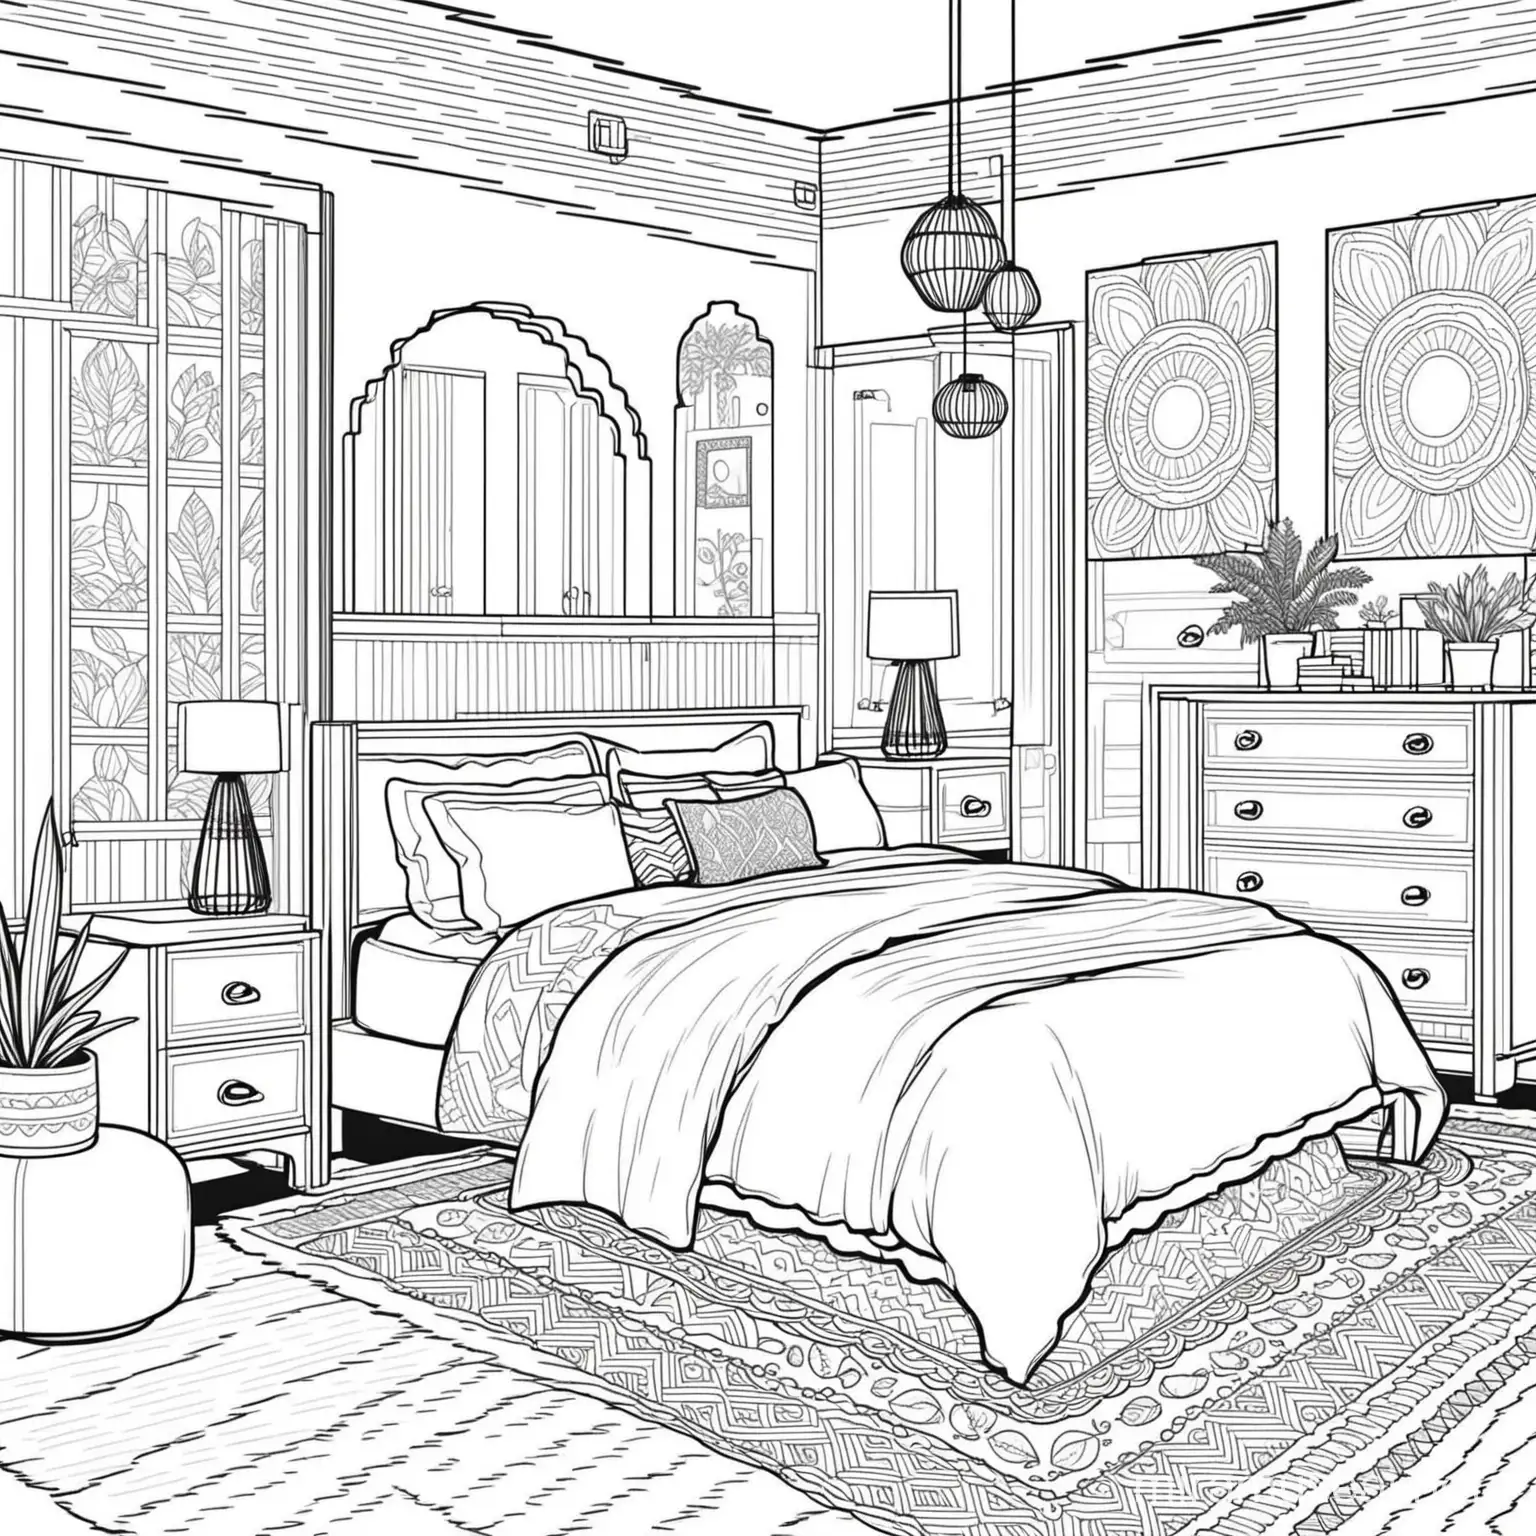 Boho Scandinavian Bedroom Coloring Page for Adults